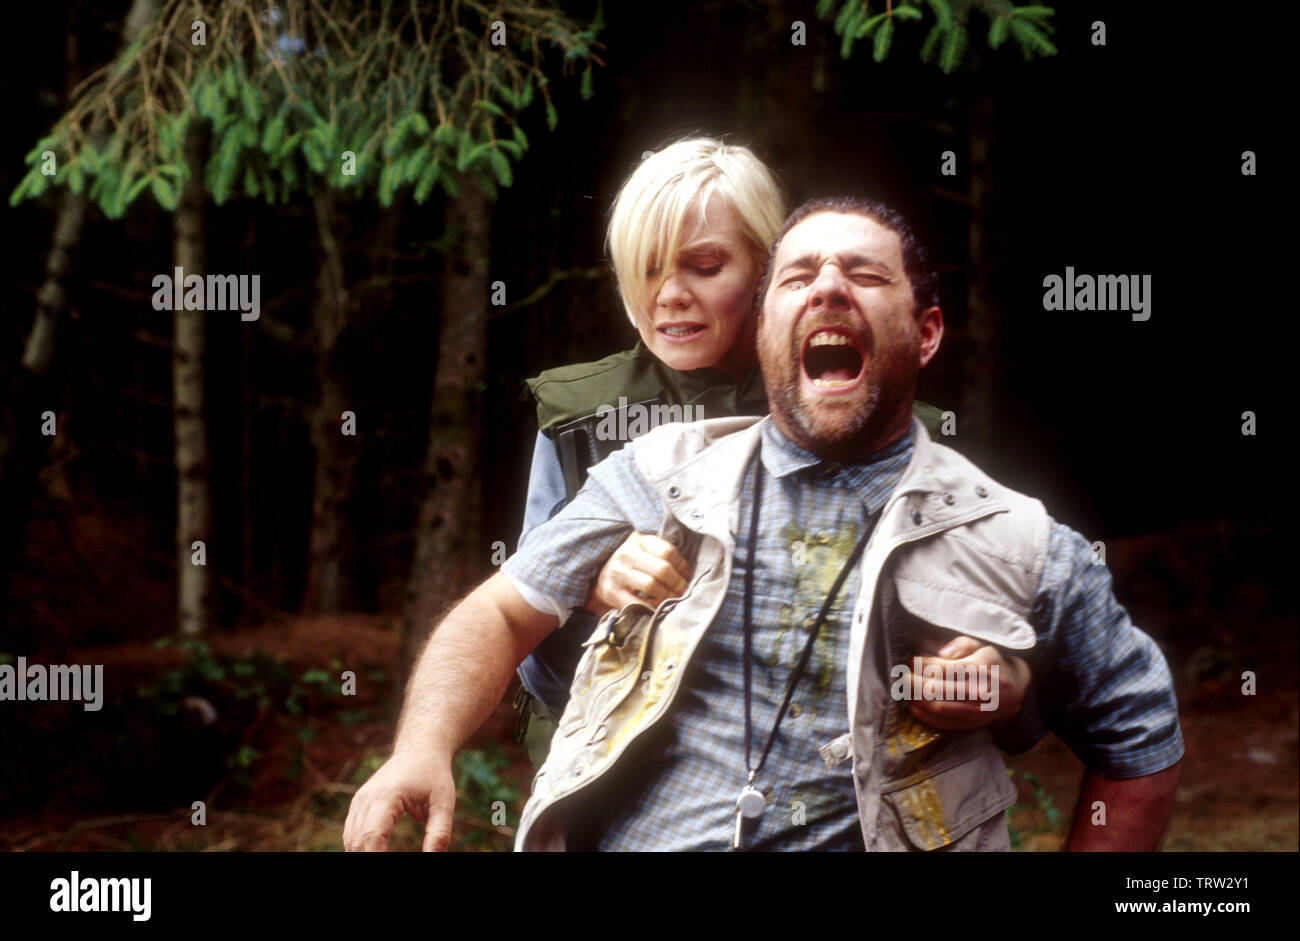 LAURA HARRIS and ANDY MYMAN in SEVERANCE (2006). Copyright: Editorial use only. No merchandising or book covers. This is a publicly distributed handout. Access rights only, no license of copyright provided. Only to be reproduced in conjunction with promotion of this film. Credit: DAN FILMS/ISLE OF MAN FILM LTD./N1 EUROPEAN FILMS PRODUKTION / Album Stock Photo